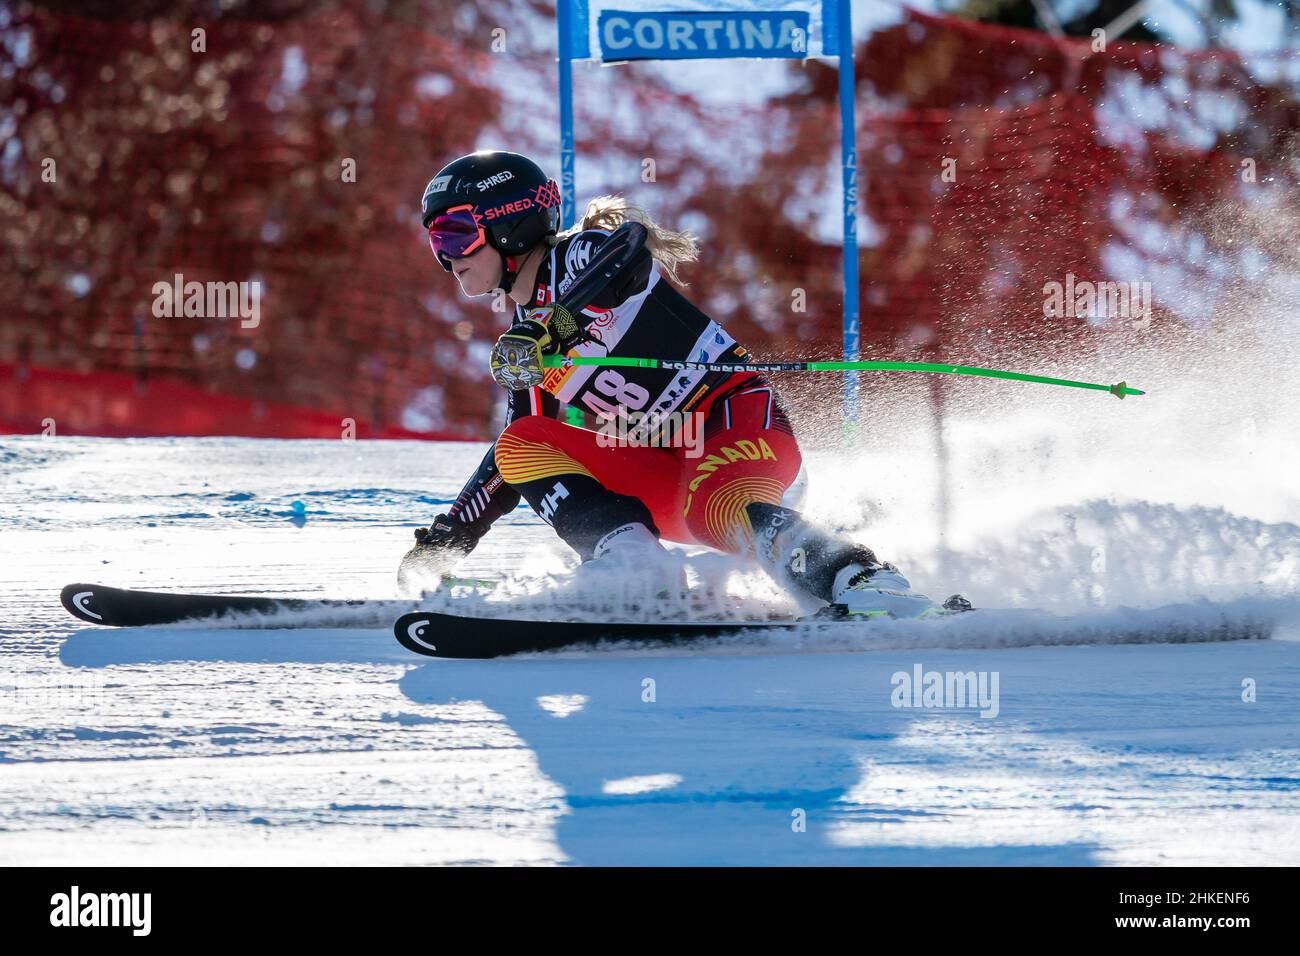 Cortina d'Ampezzo, Italy. 23 January 2022. REMME Roni (CAN) competing in the Fis Alpine Ski World Cup Women's Super-G on the Olympia delle Tofane. Stock Photo